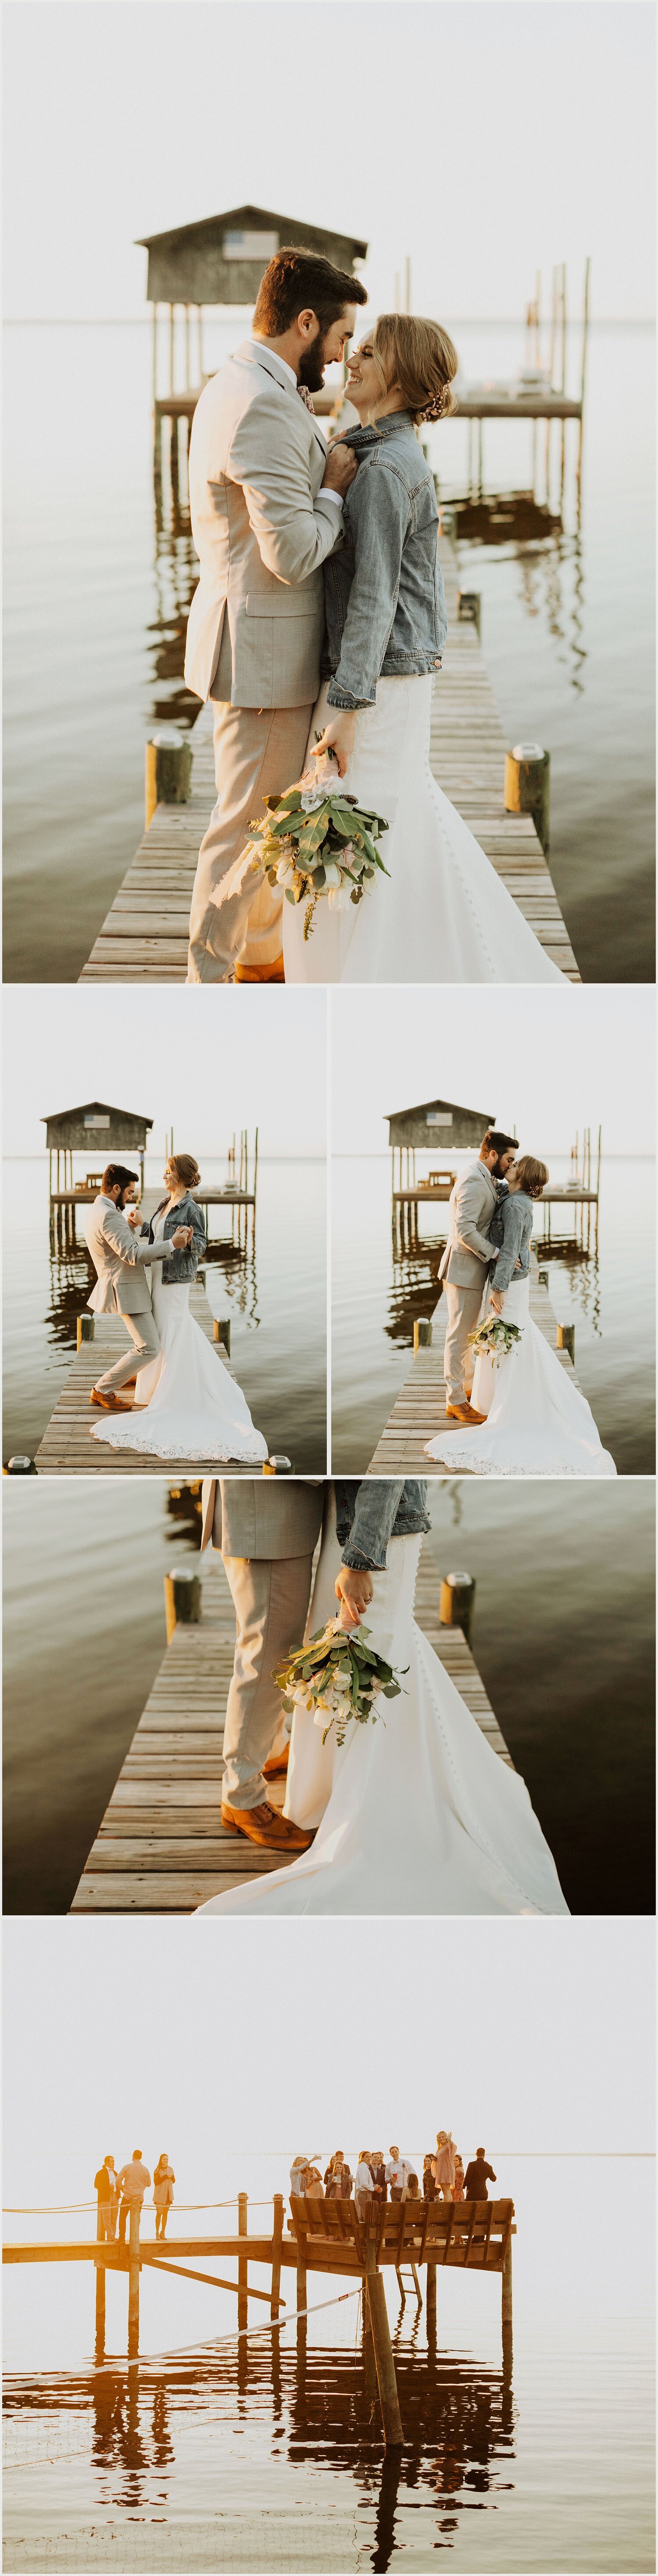 Bride and Groom Sunset Portraits